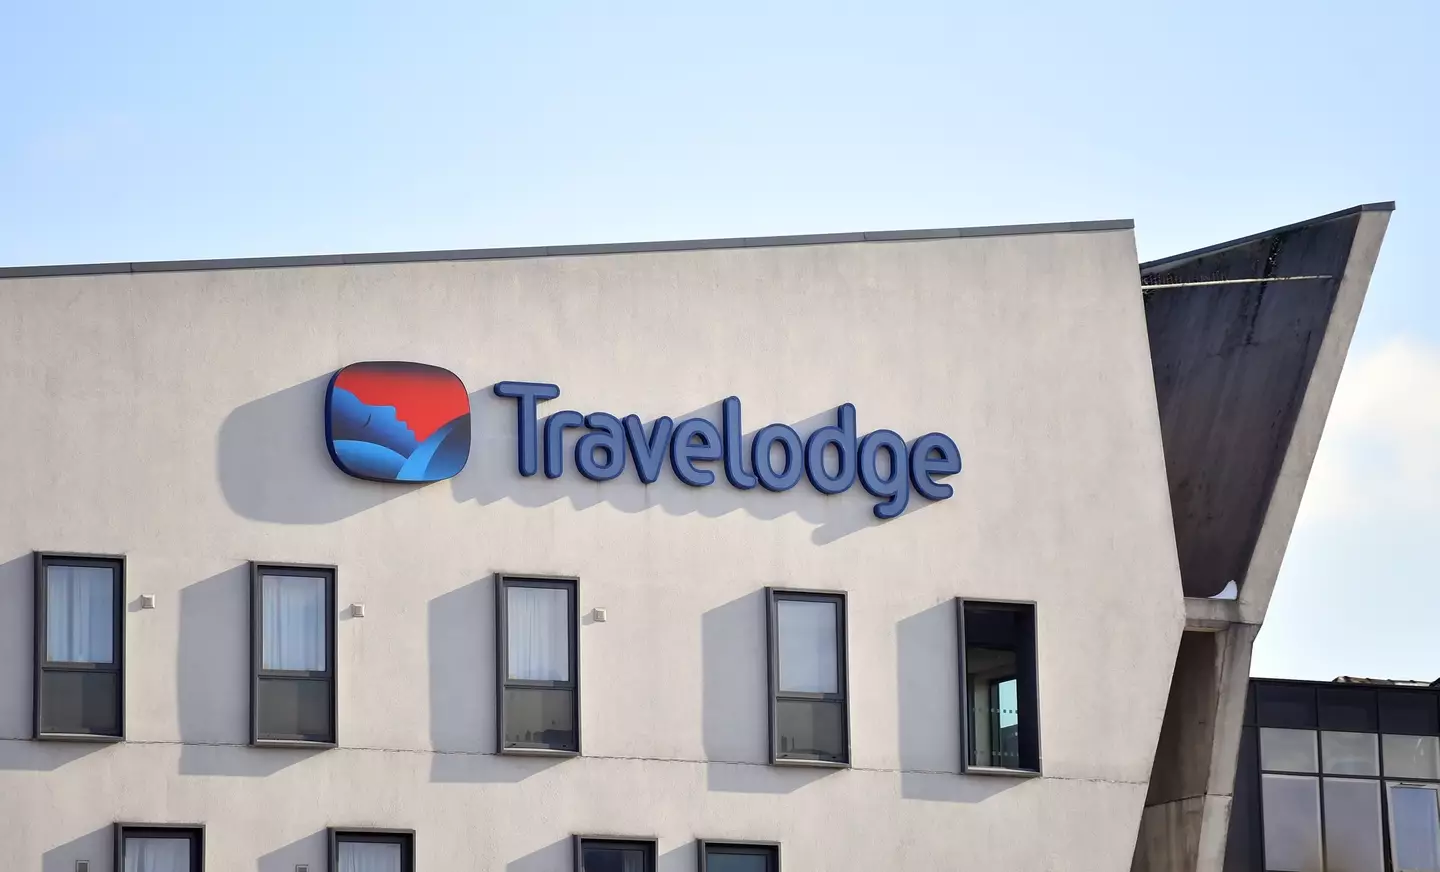 The Travelodge logo is a bit of an optical illusion.